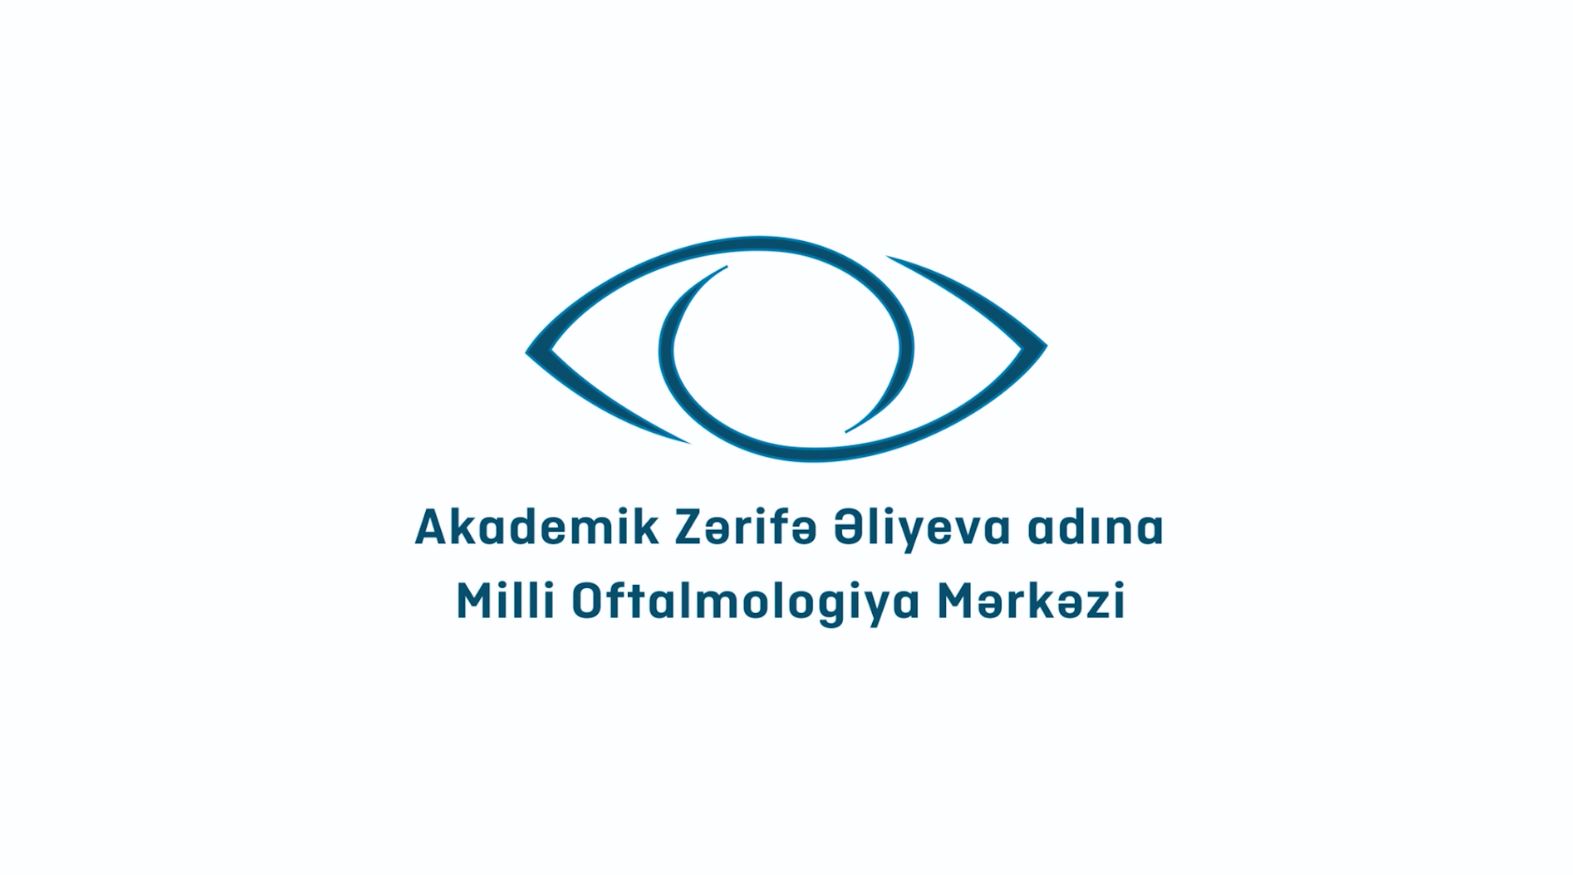 National Ophthalmology Centre named after academician Zarifa Aliyeva